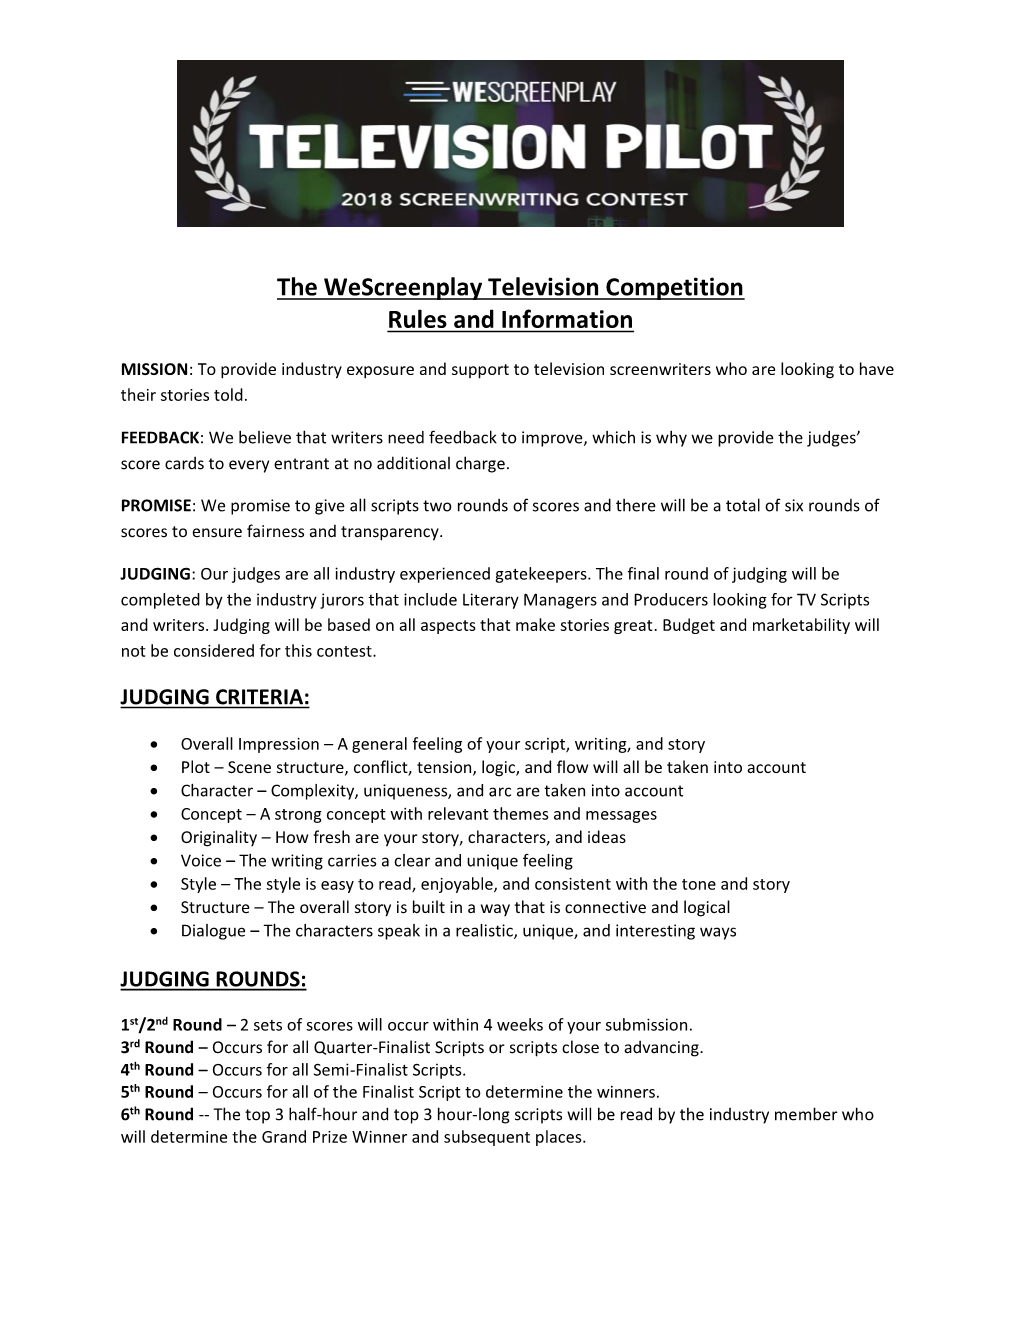 Wetv: the Wescreenplay Television Competition